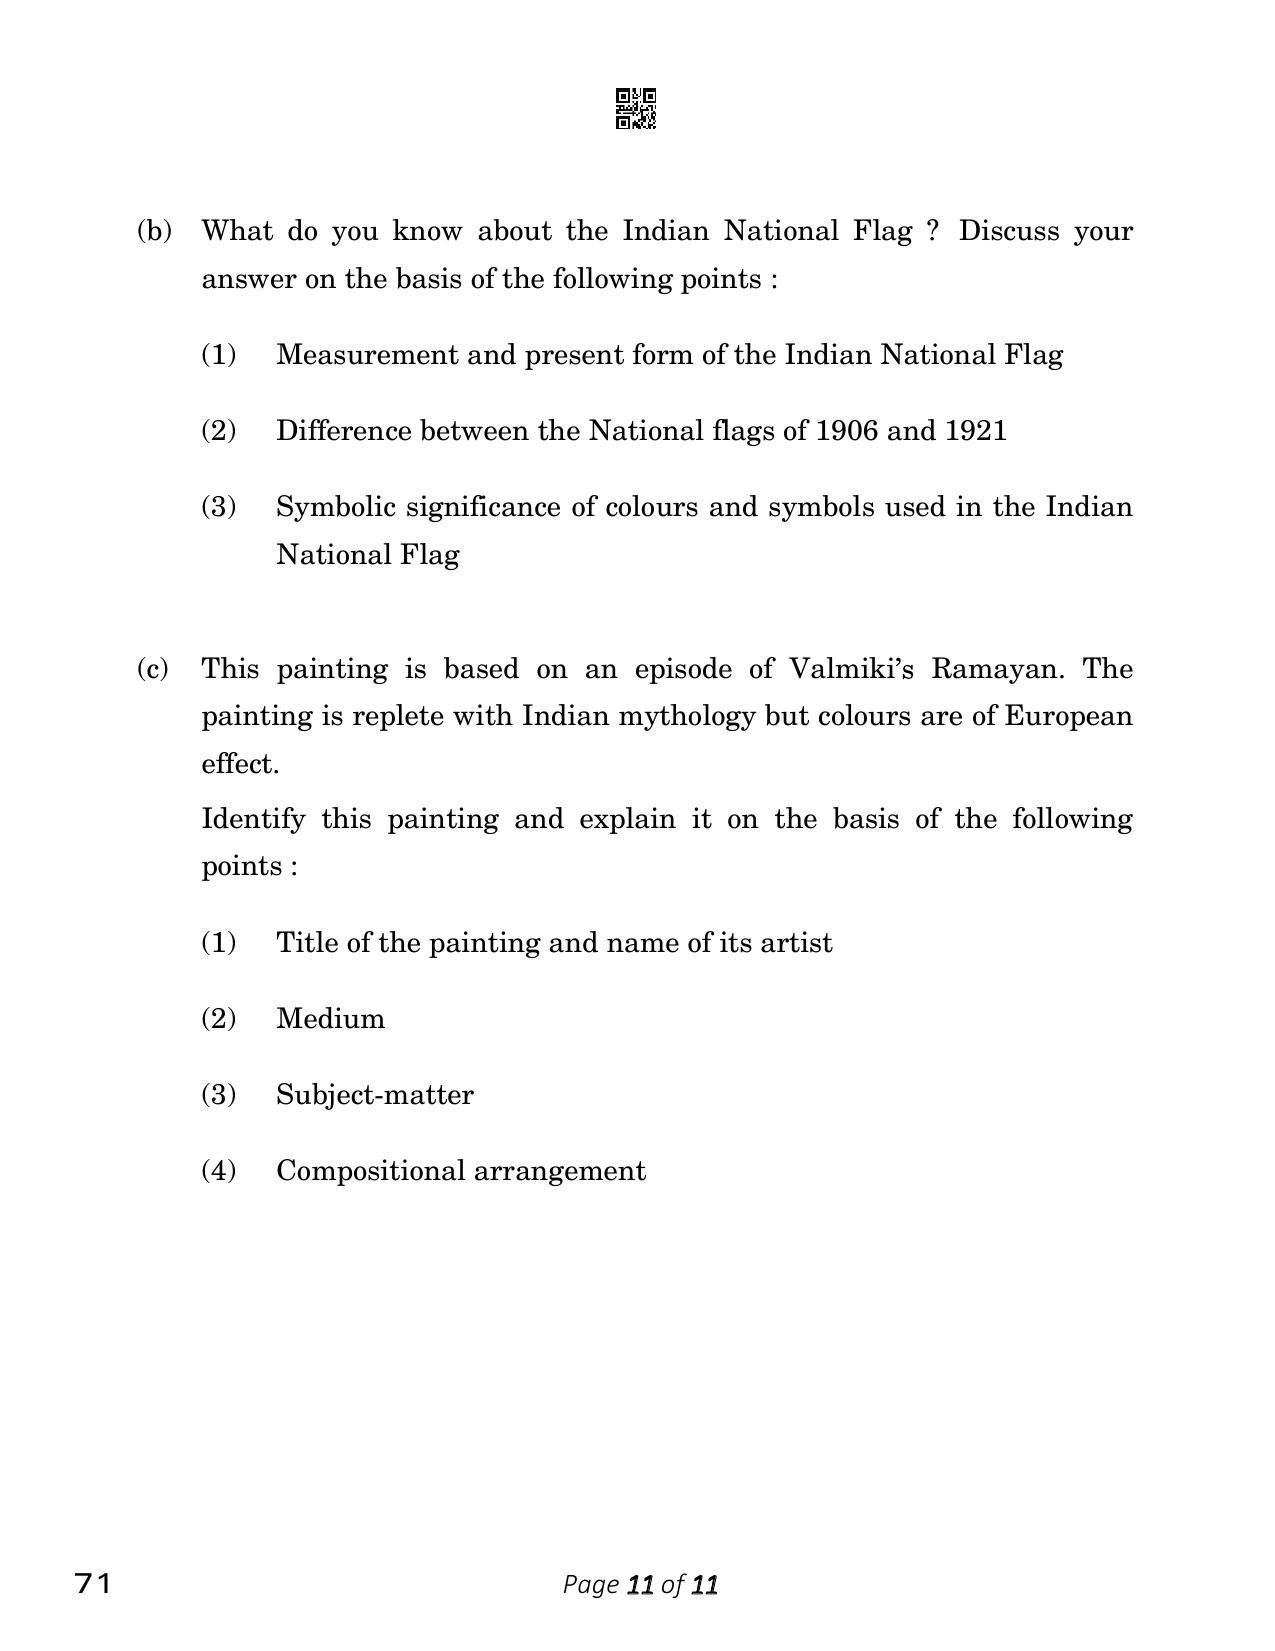 CBSE Class 12 Painting (Compartment) 2023 Question Paper - Page 11